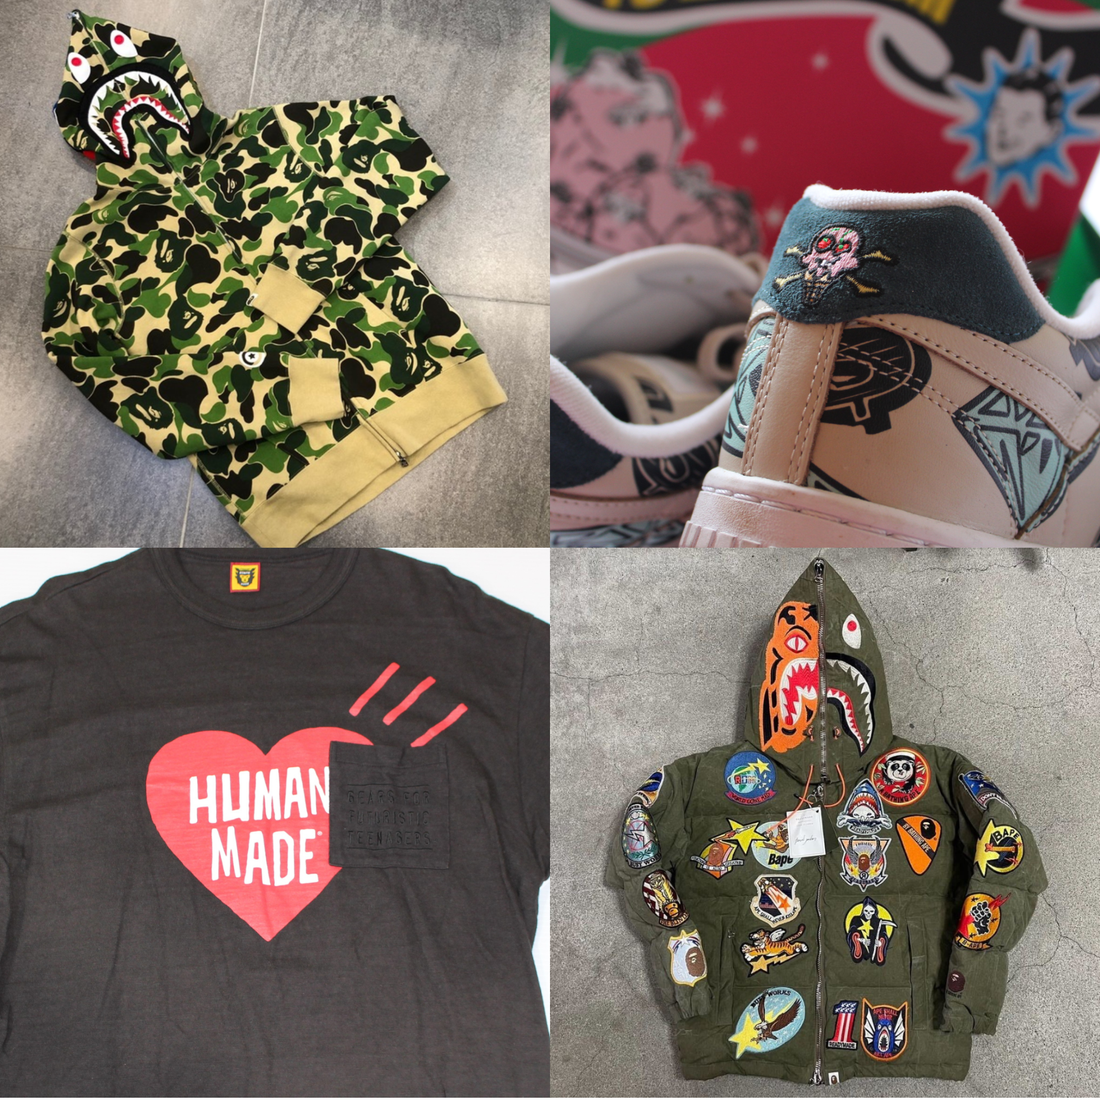 【BAPE/HUMAN MADE】Introduction of great brand items that Mr. NIGO is involved in.